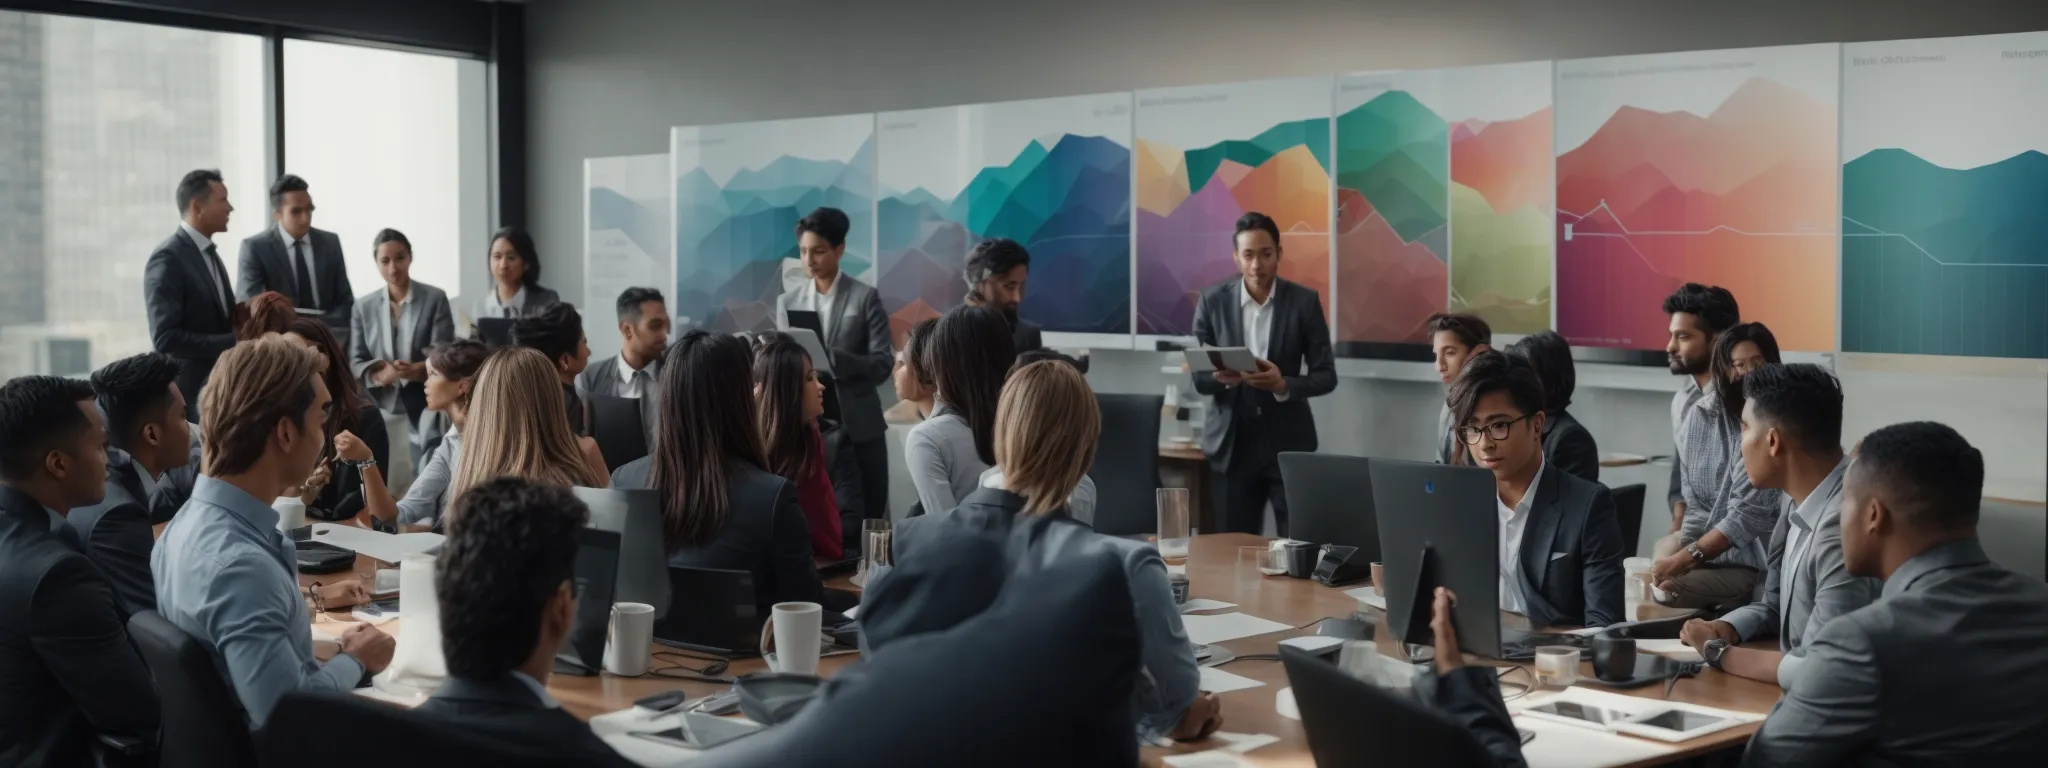 a group of professionals gathers around a conference table, focusing intently on a large screen displaying colorful graphs and digital marketing trends.